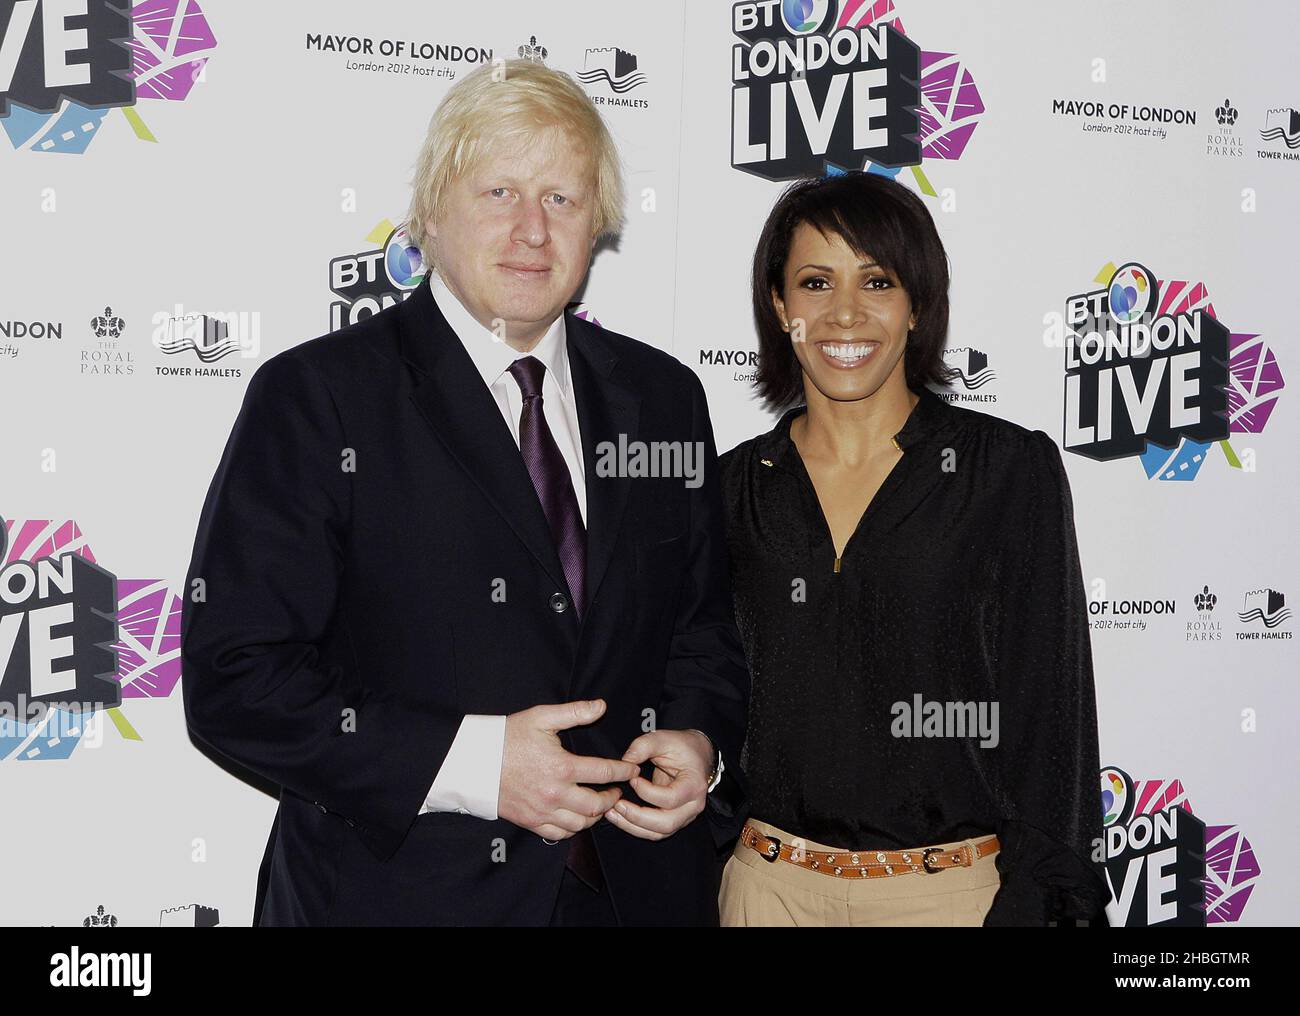 Olympian and BT Ambassador Dame Kelly Holmes and Mayor of London Boris Johnson launch BT London Live at the BT Tower in London Stock Photo